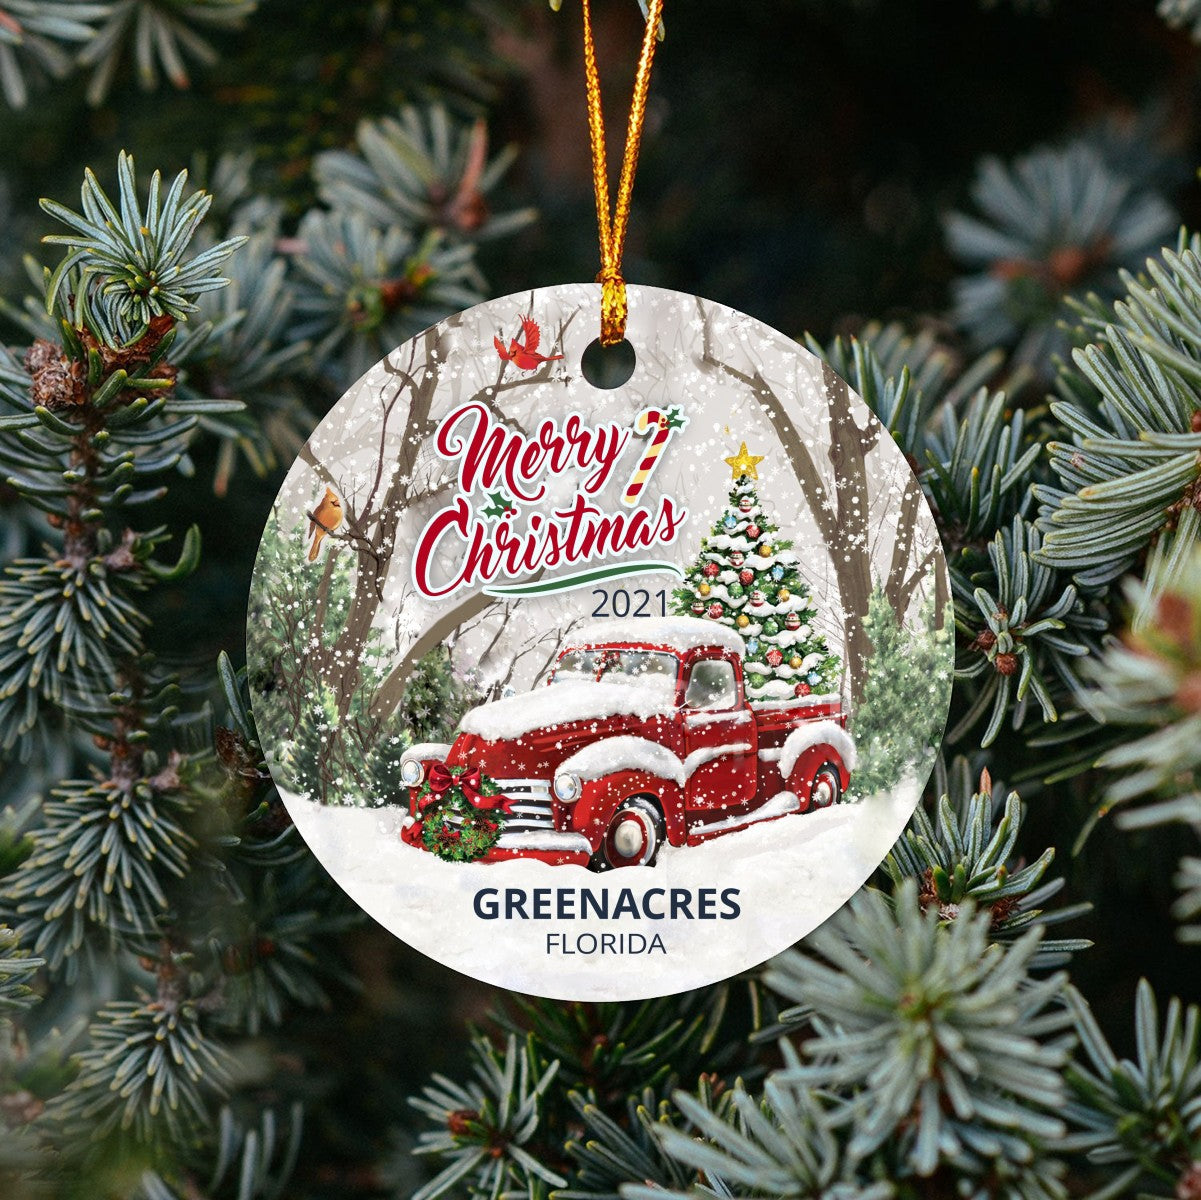 Christmas Tree Ornaments Greenacres - Ornament Customize With Name City And State Greenacres Florida FL - Red Truck Xmas Ornaments 3'' Plastic Gift For Family, Friend And Housewarming